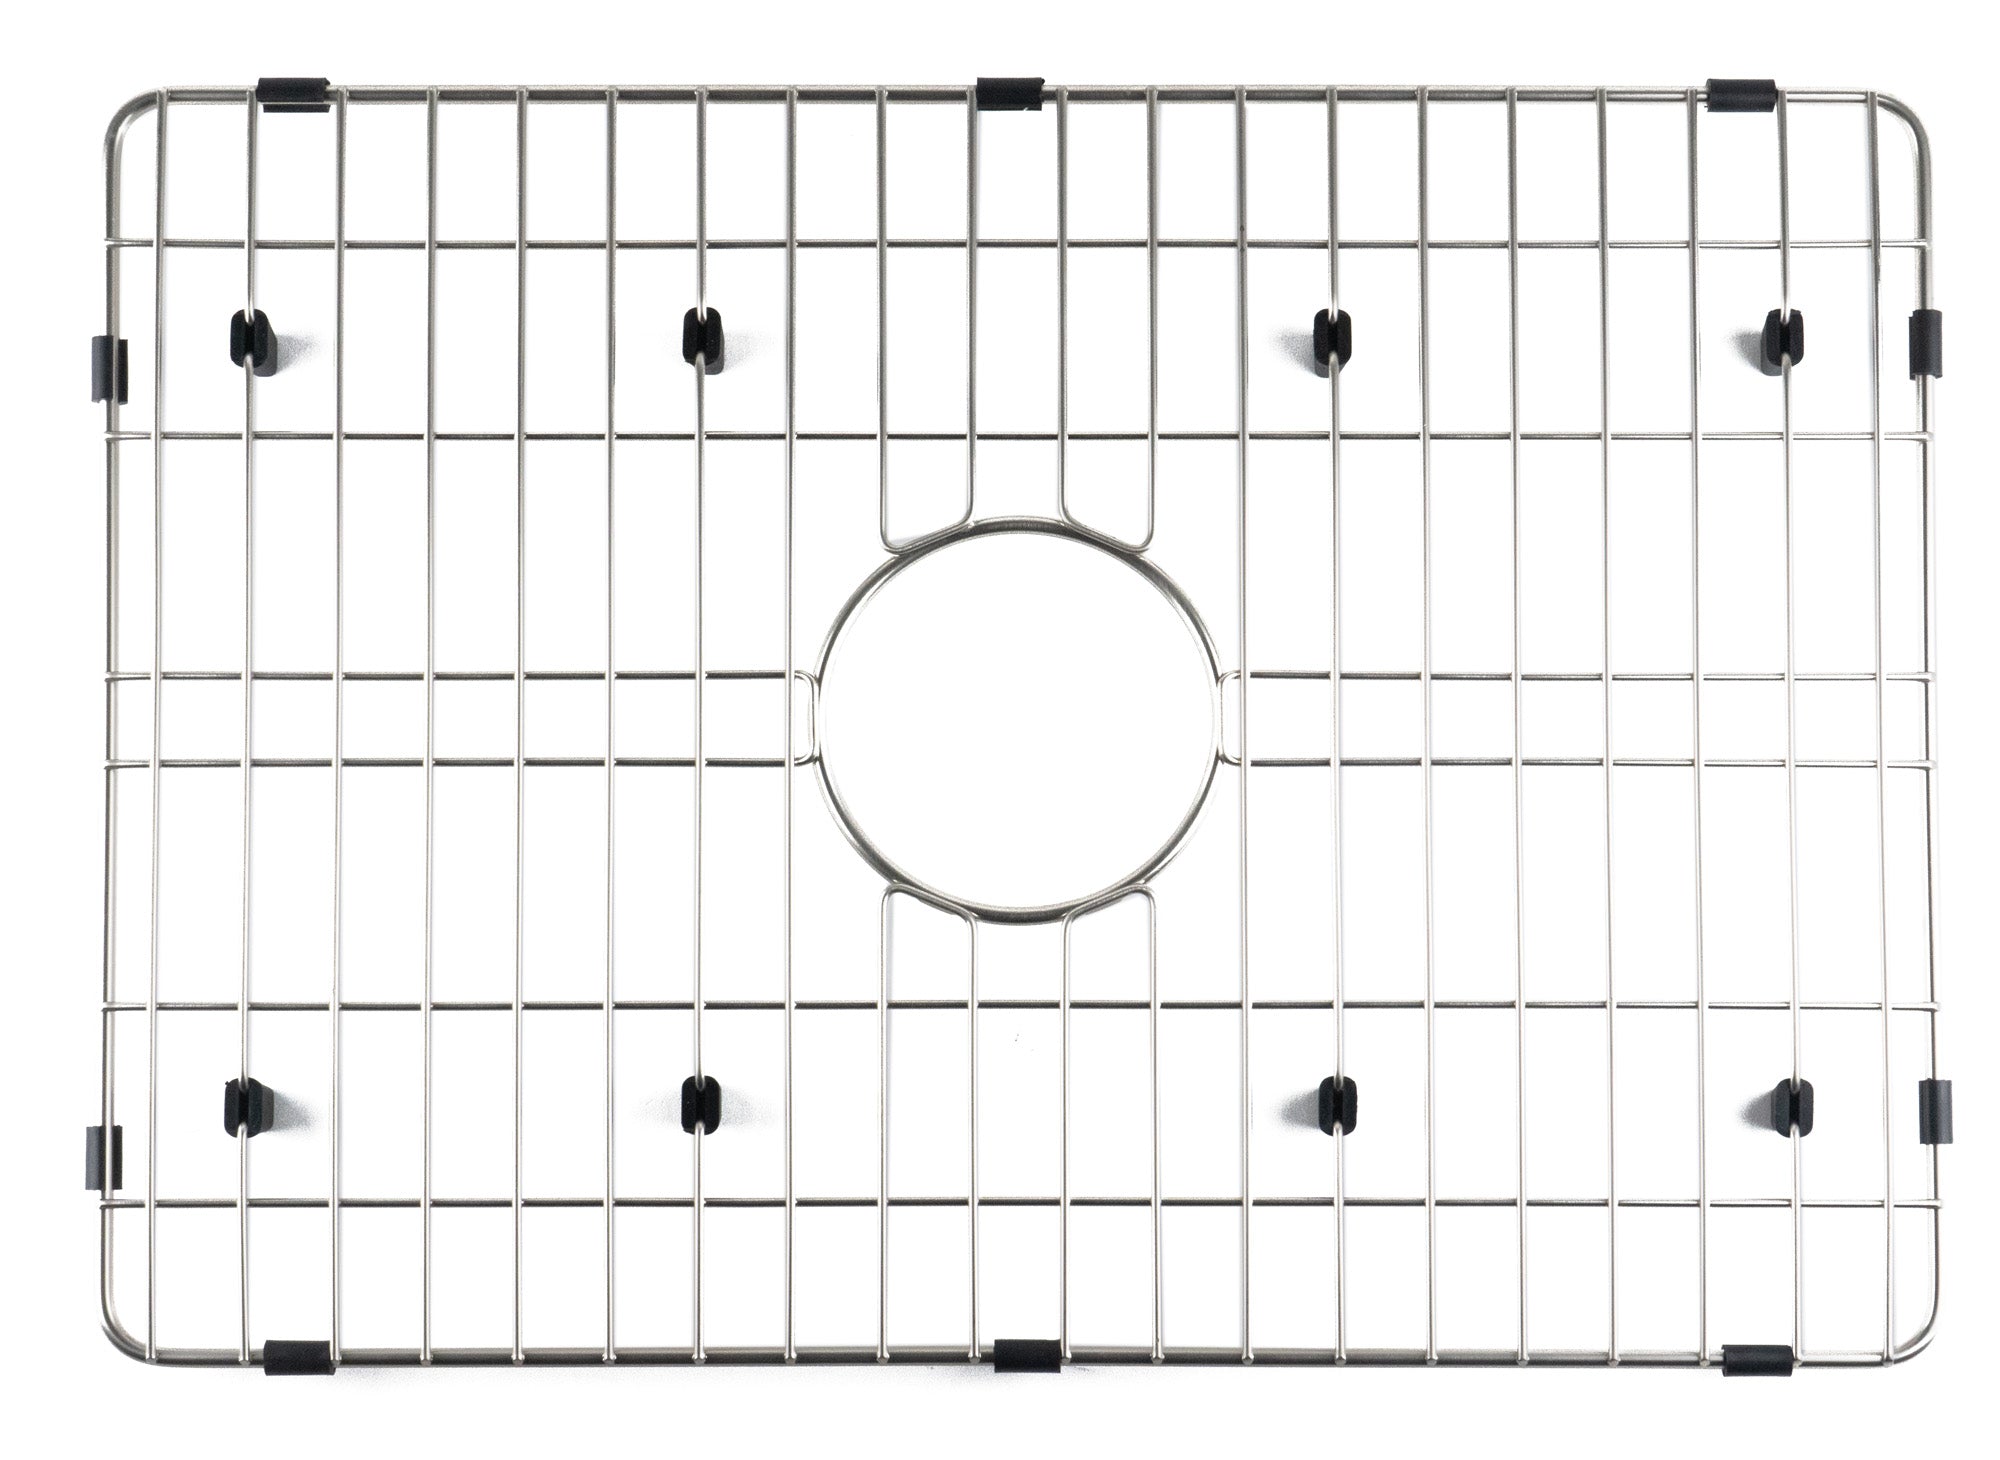 ALFI Brand - Solid Stainless Steel Kitchen Sink Grid for ABF2418 Sink | ABGR24